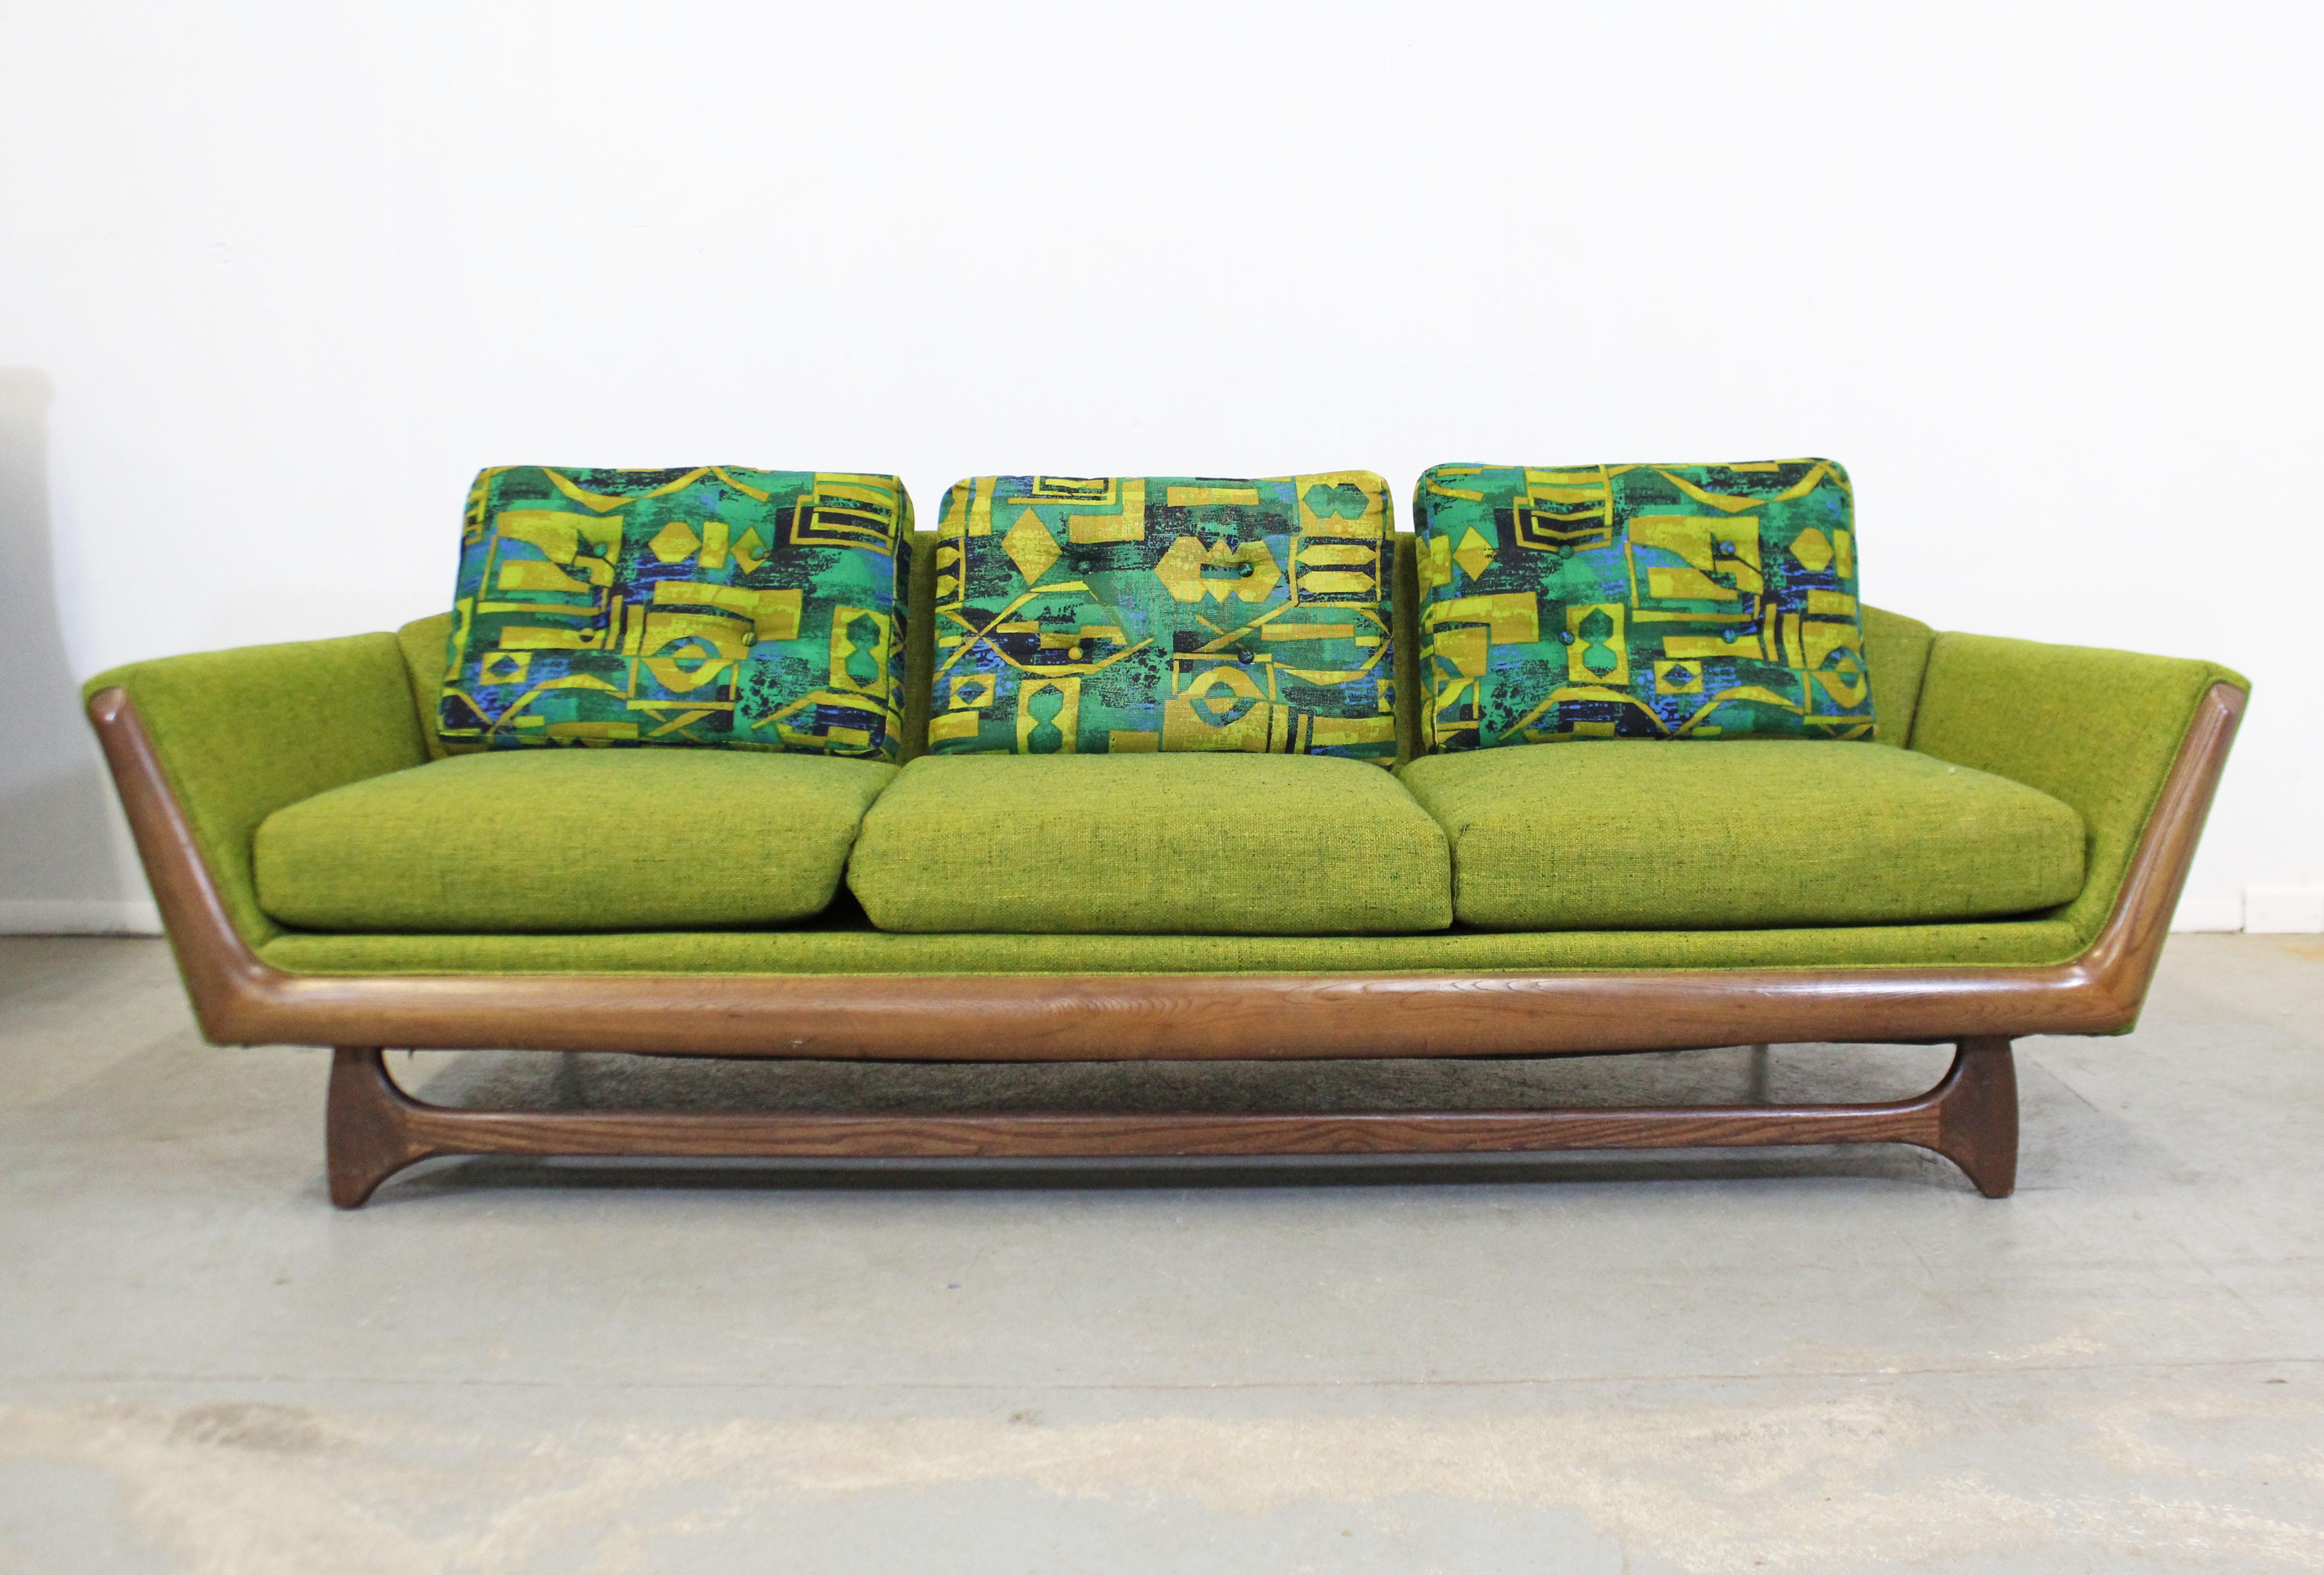 Offered is a gorgeous Mid-Century Modern sofa similar to the style of Adrian Pearsall. Absolutely incredible lines on this sofa. Features a sculpted wooden base, original green upholstery with three removable blue/green back cushions with a funky